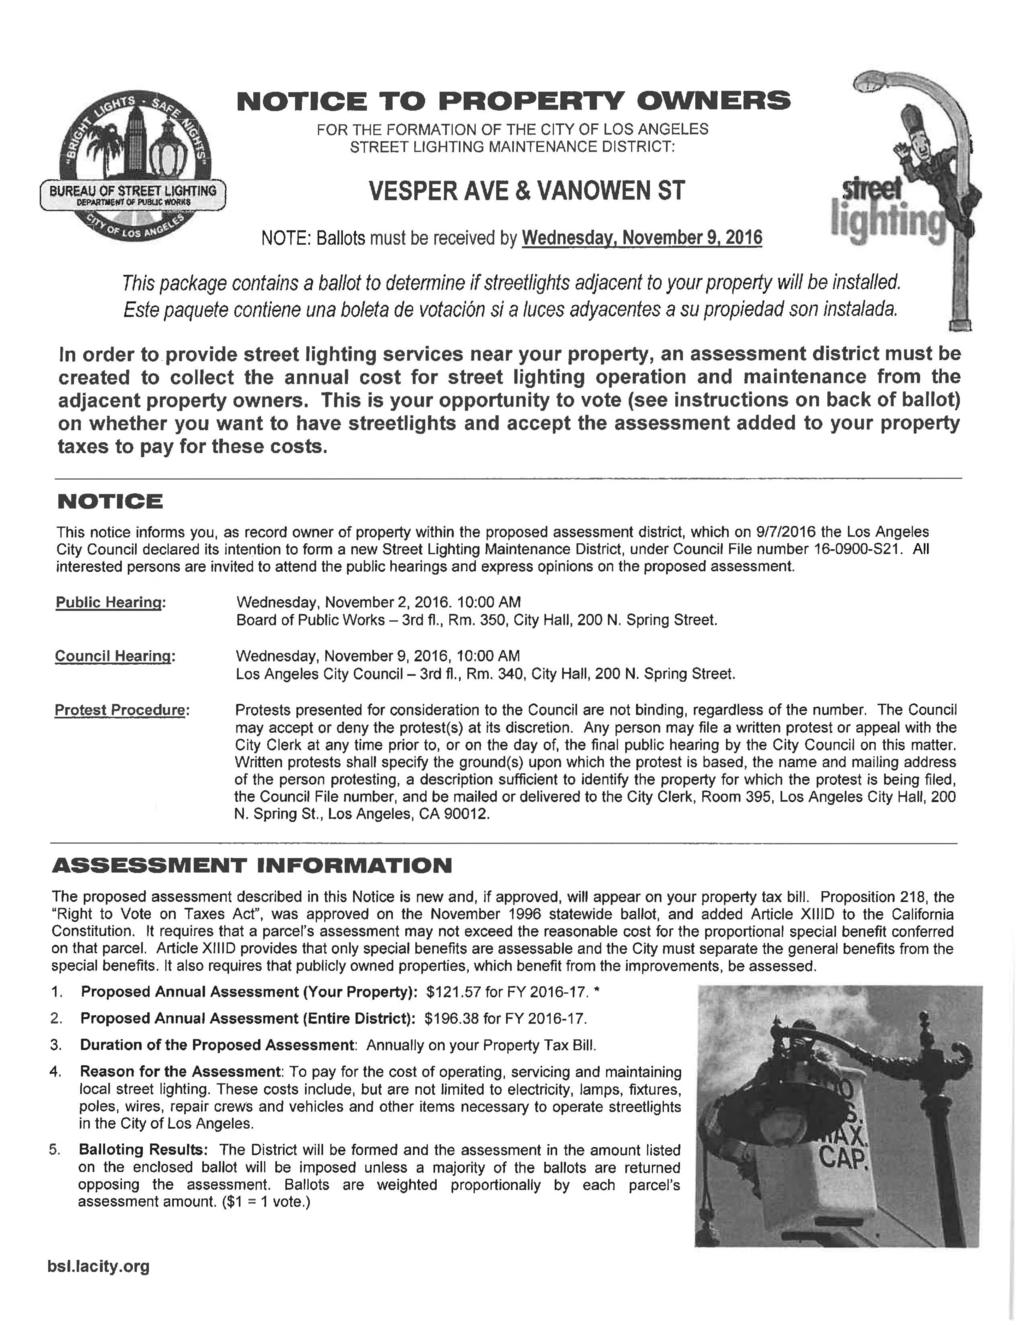 NOTICE TO PROPERTY OWNERS FOR THE FORMATION OF THE CITY OF LOS ANGELES STREET LIGHTING MAINTENANCE DISTRICT: BUREAU OF STREET UGHTiN(T) of pvsuc imm J 1I VESPER AVE & VANOWEN ST NOTE: Ballots must be